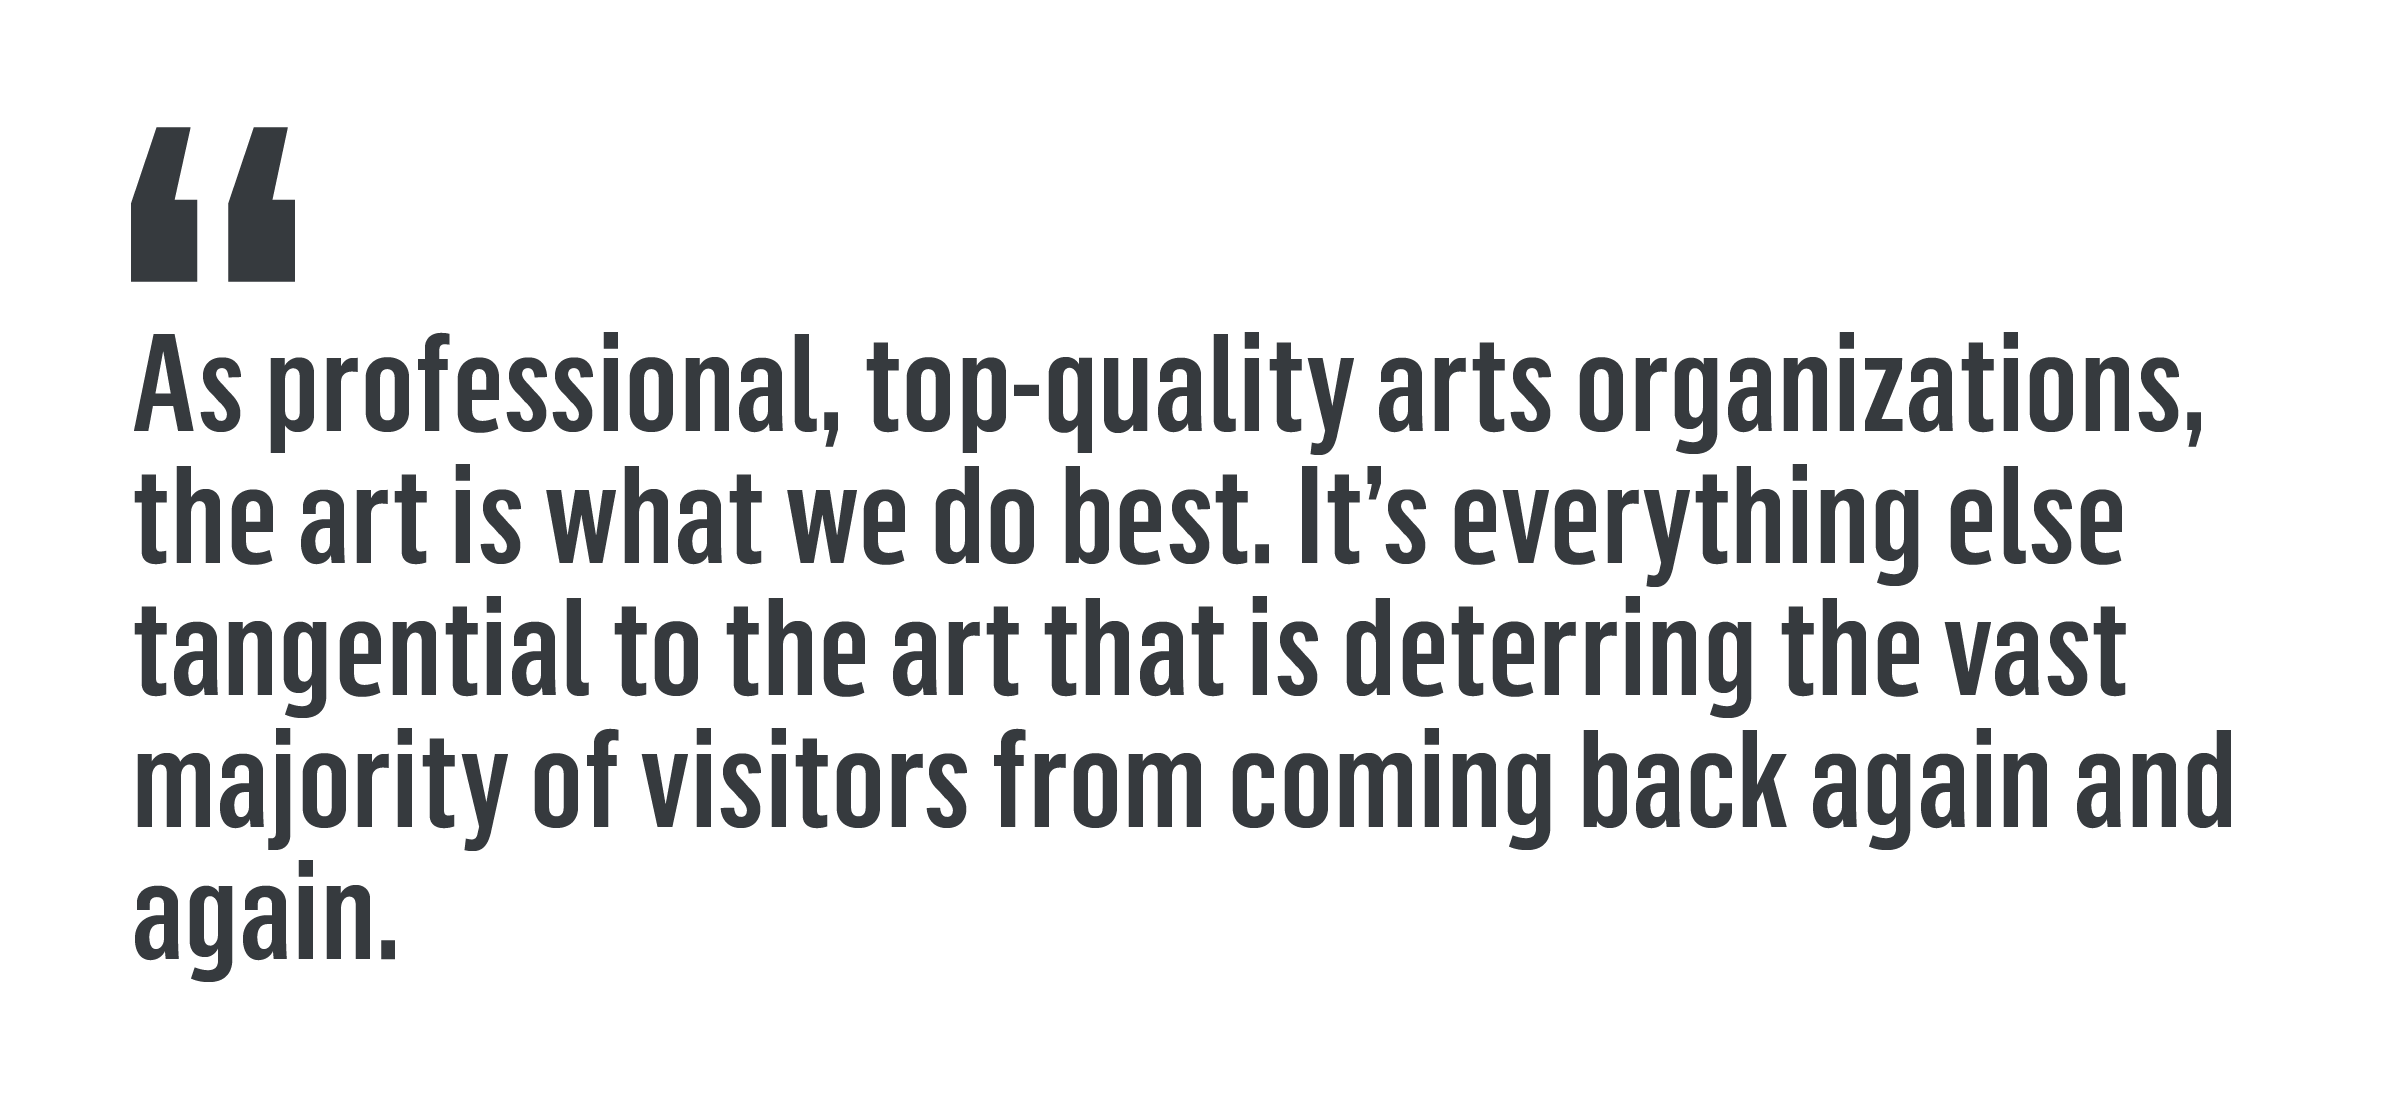 'As professional, top-quality arts organizations, the art is what we do best. It’s everything else tangential to the art that is deterring the vast majority of visitors from coming back again and again.'